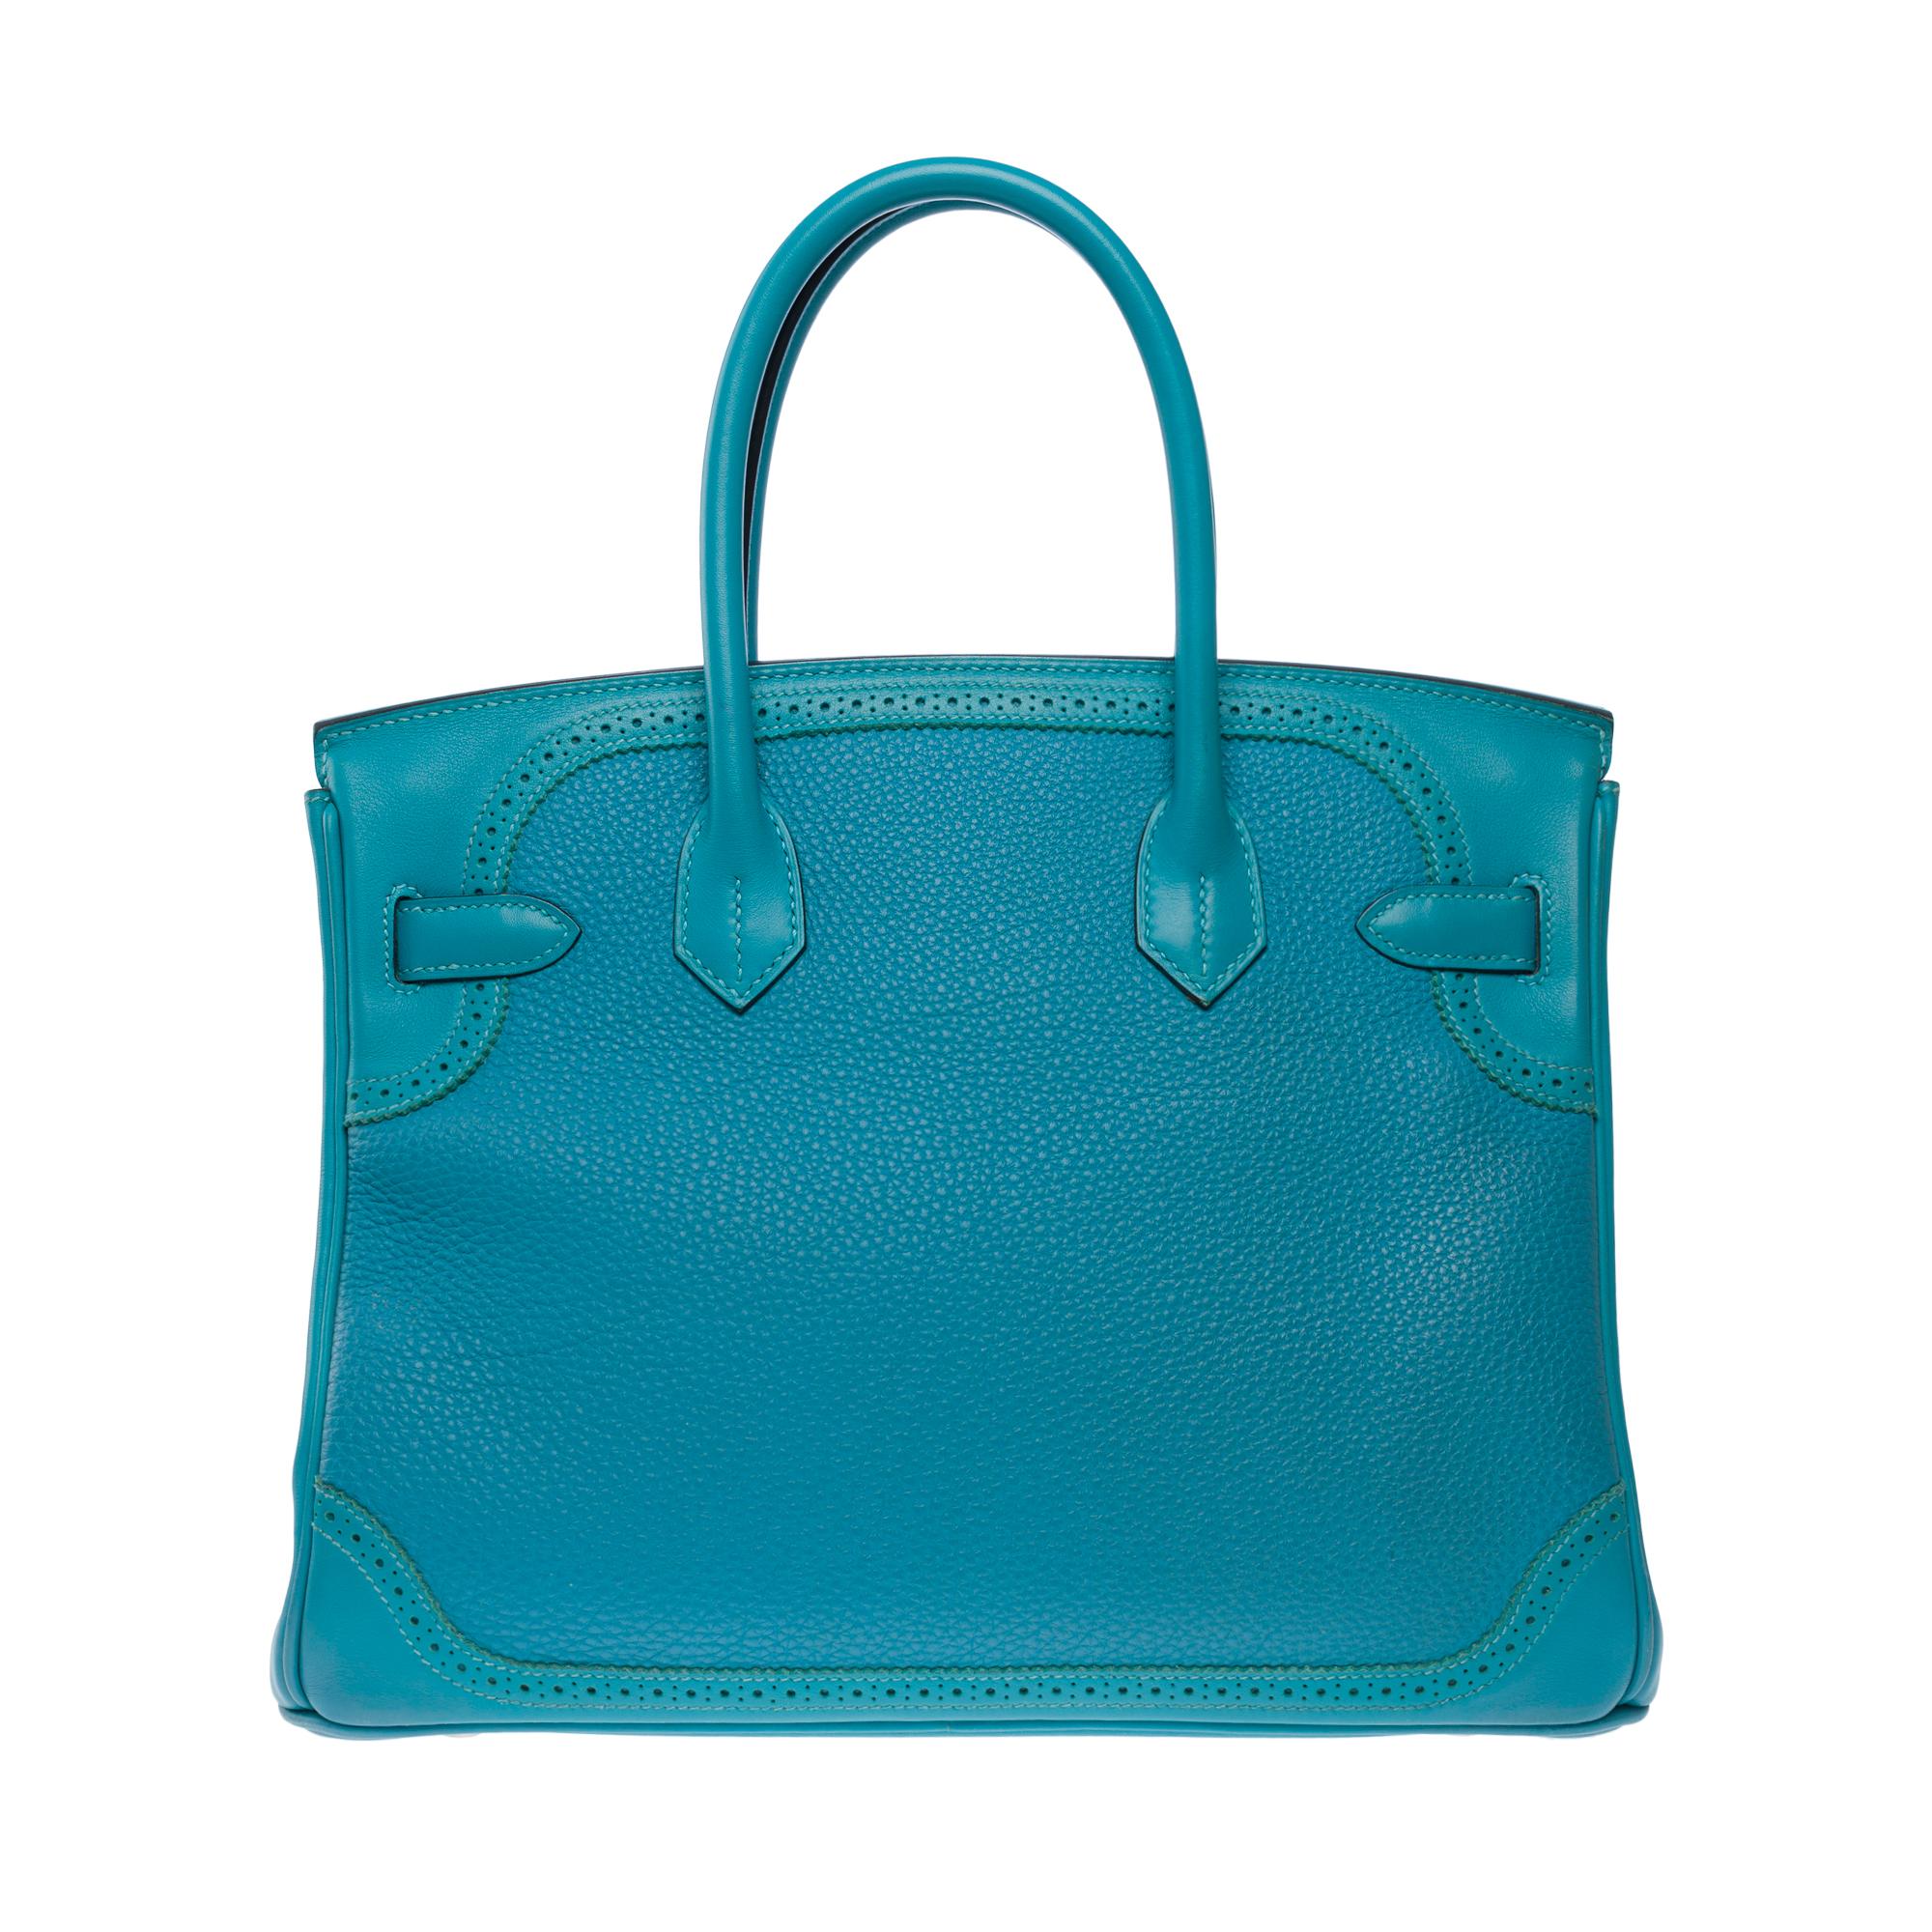 Women's Ghillies Limited Edition Hermes Birkin 30 handbag in Turquoise Blue leather, SHW For Sale